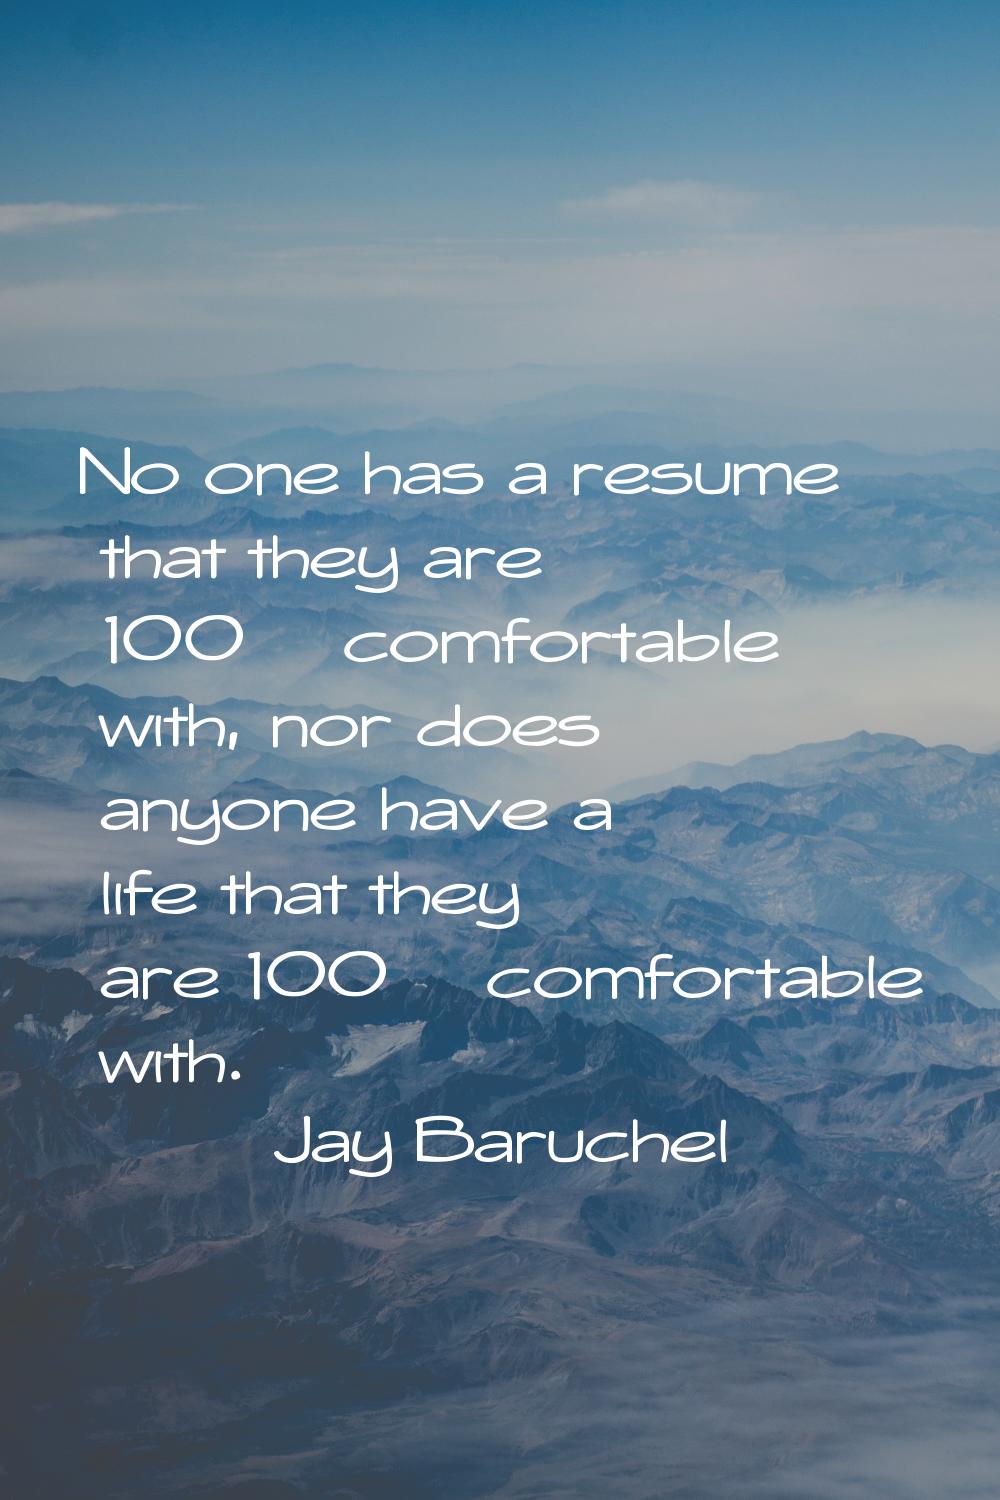 No one has a resume that they are 100% comfortable with, nor does anyone have a life that they are 